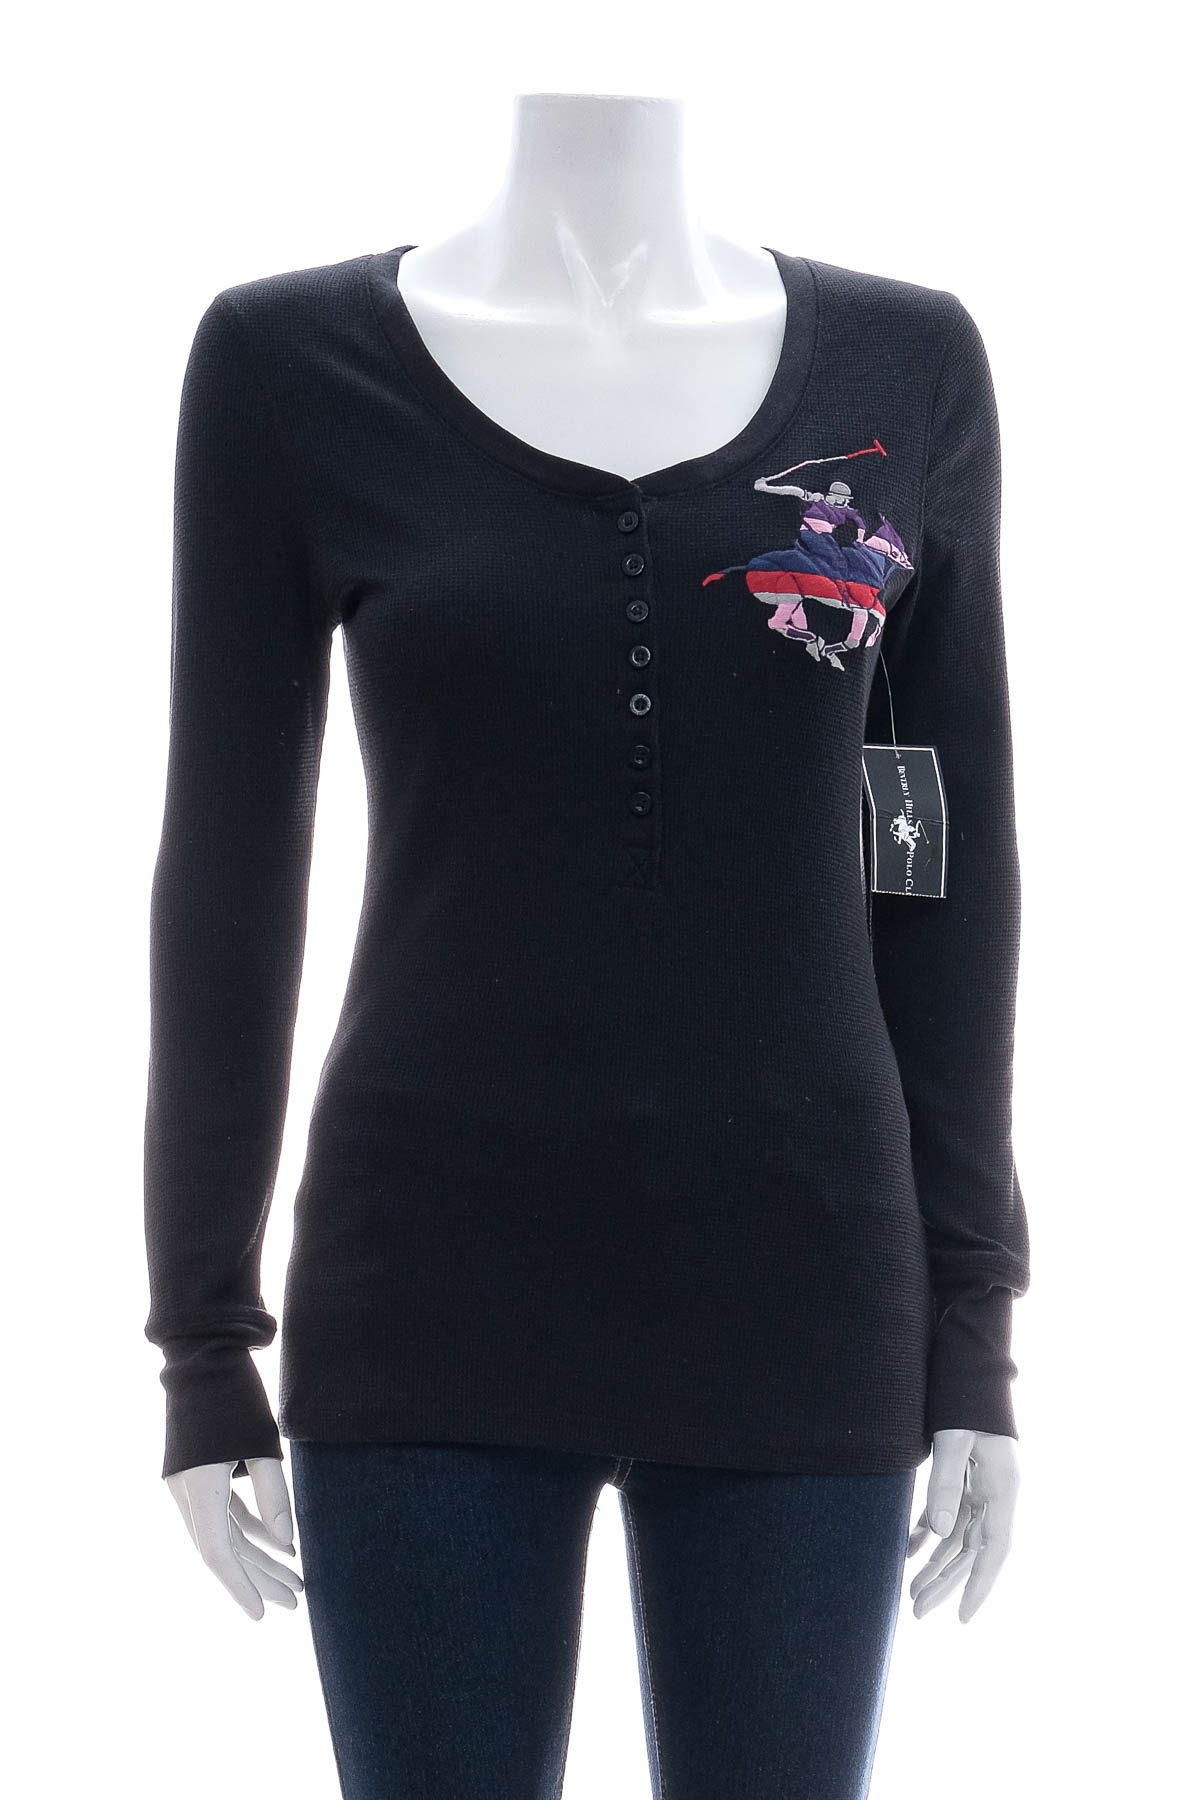 Women's blouse - Beverly Hills Polo Club - 0